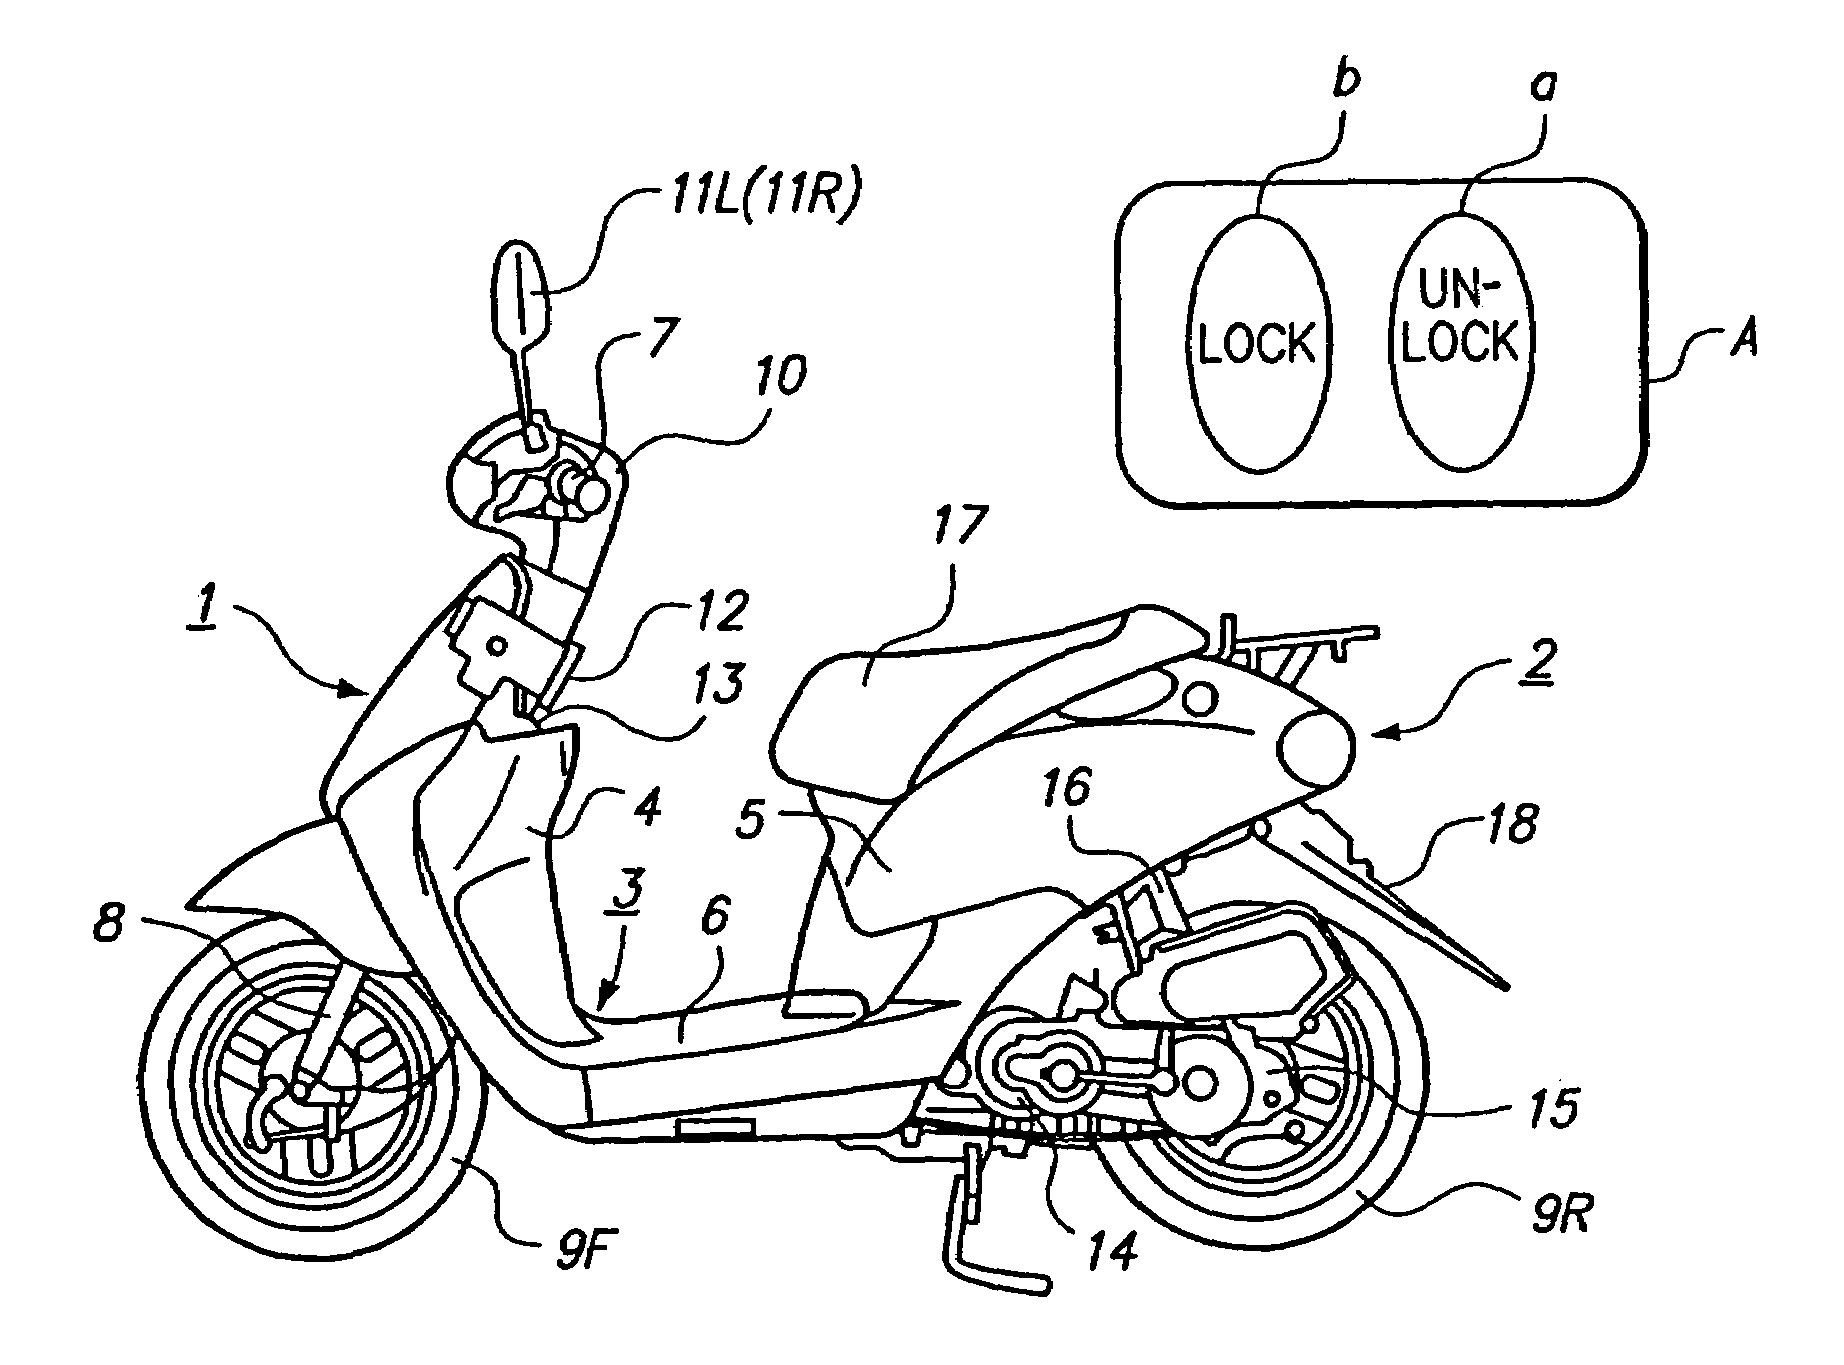 Anti-theft device in motorcycle